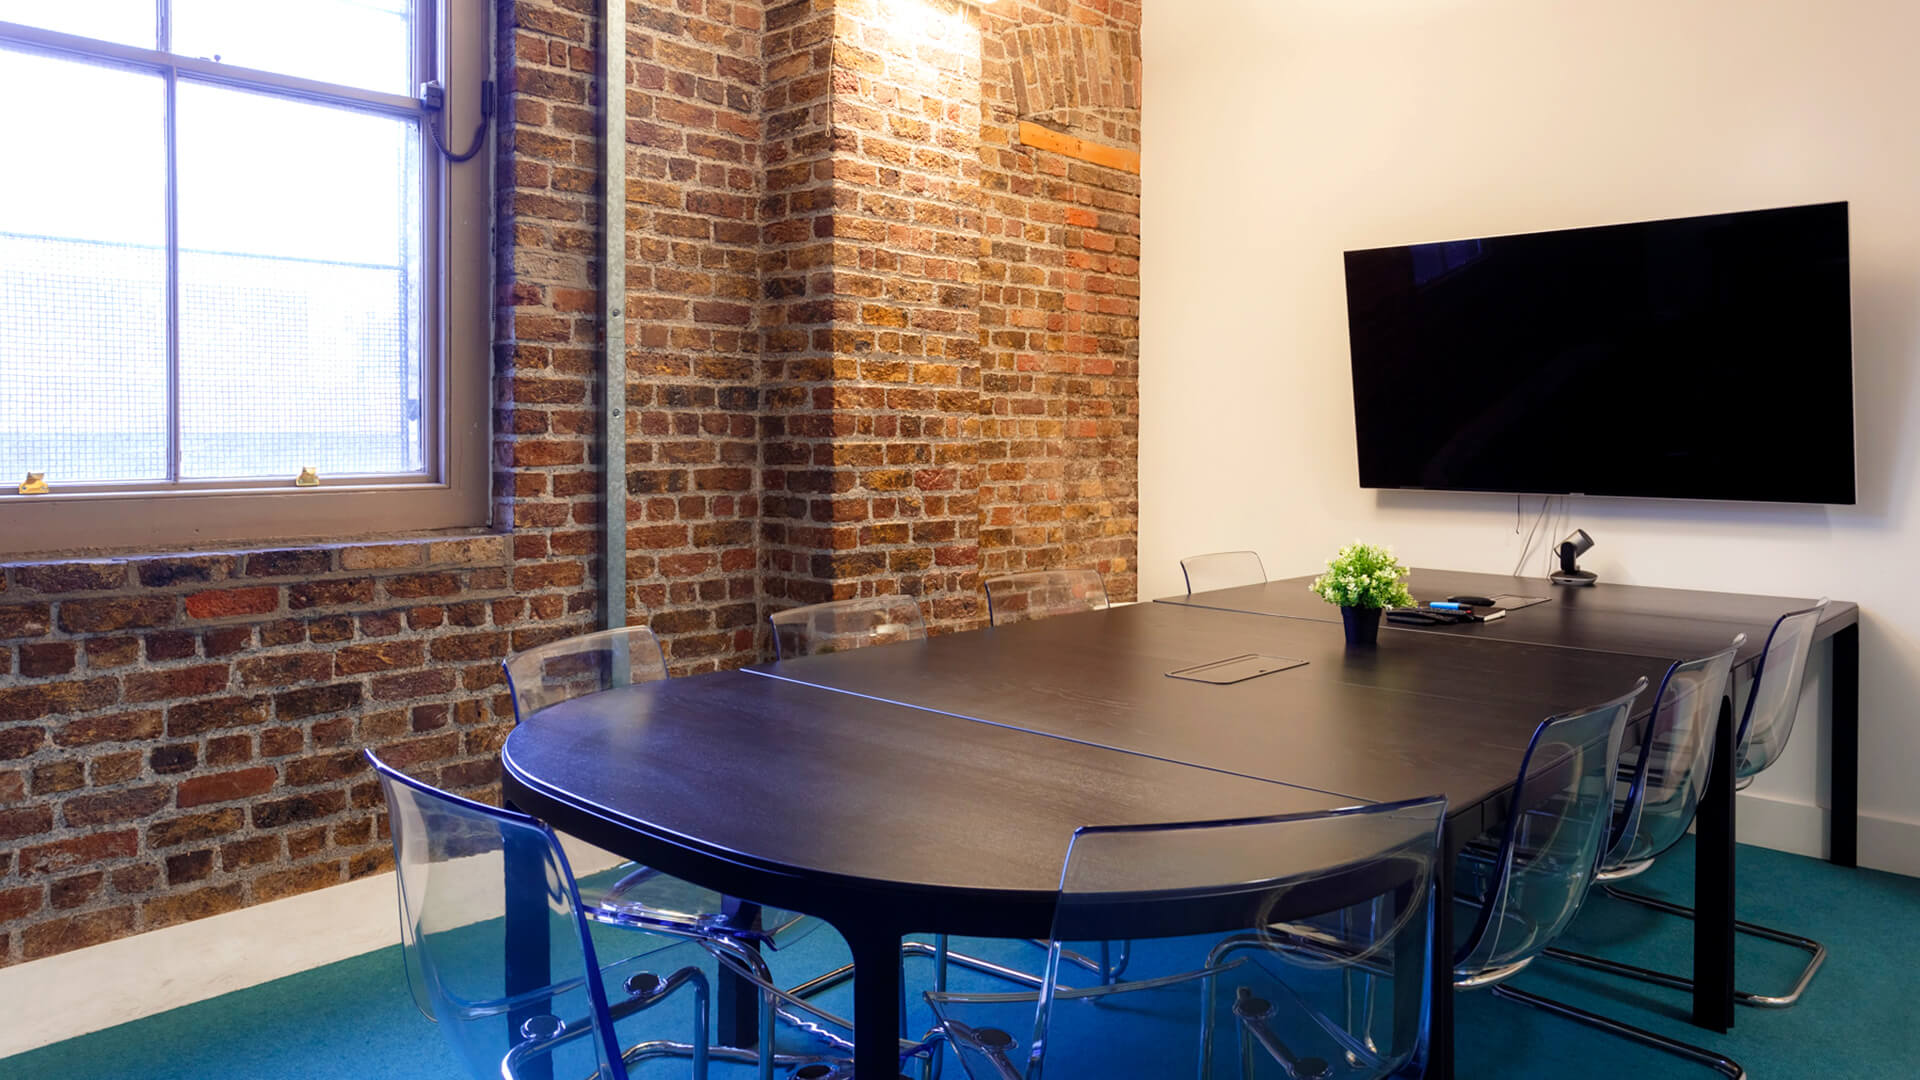 Chairs are arranged around a wooden desk and display screen in a meeting room with exposed brick walls